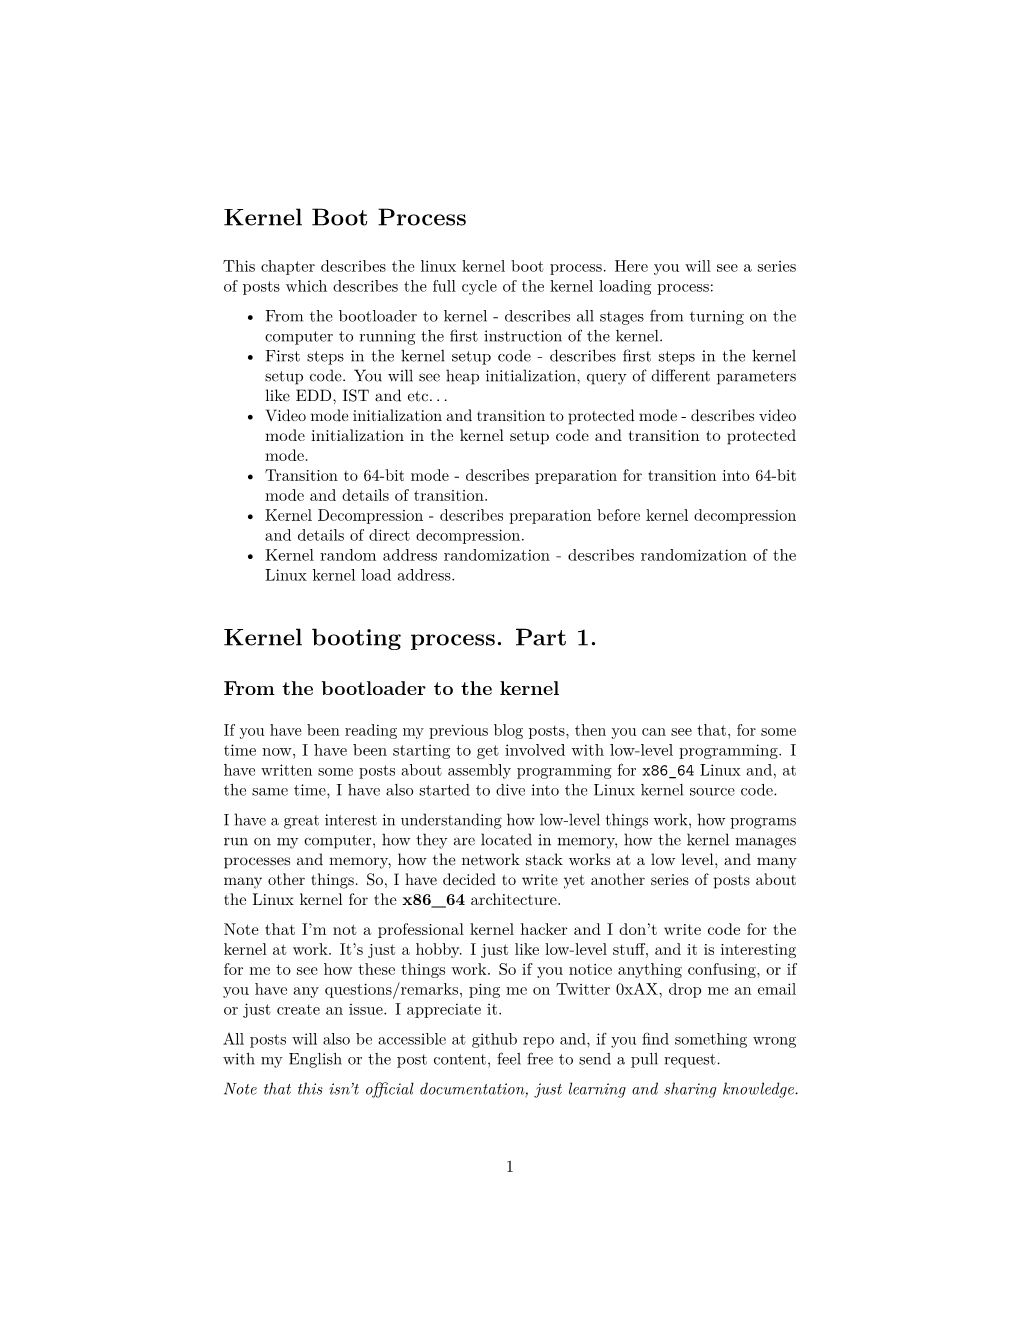 Kernel Boot Process Kernel Booting Process. Part 1